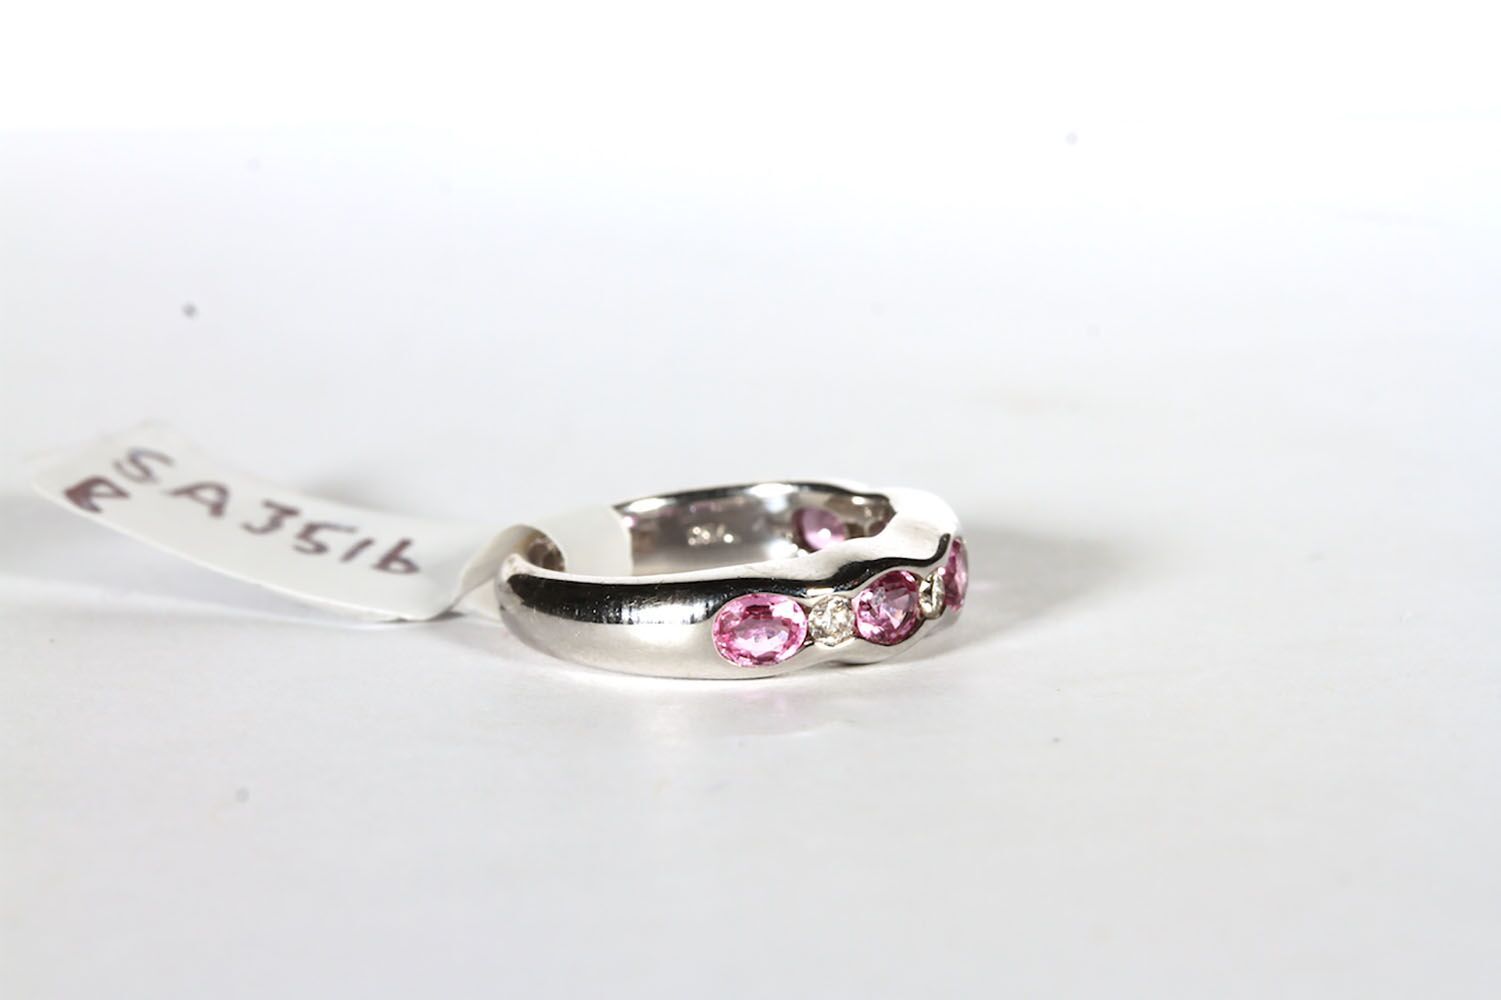 18CT PRAVINS PINK TOURMALINE AND DIAMOND DRESS RING,pink stones estimated as 4x3mm , 4x brilliant - Image 2 of 3